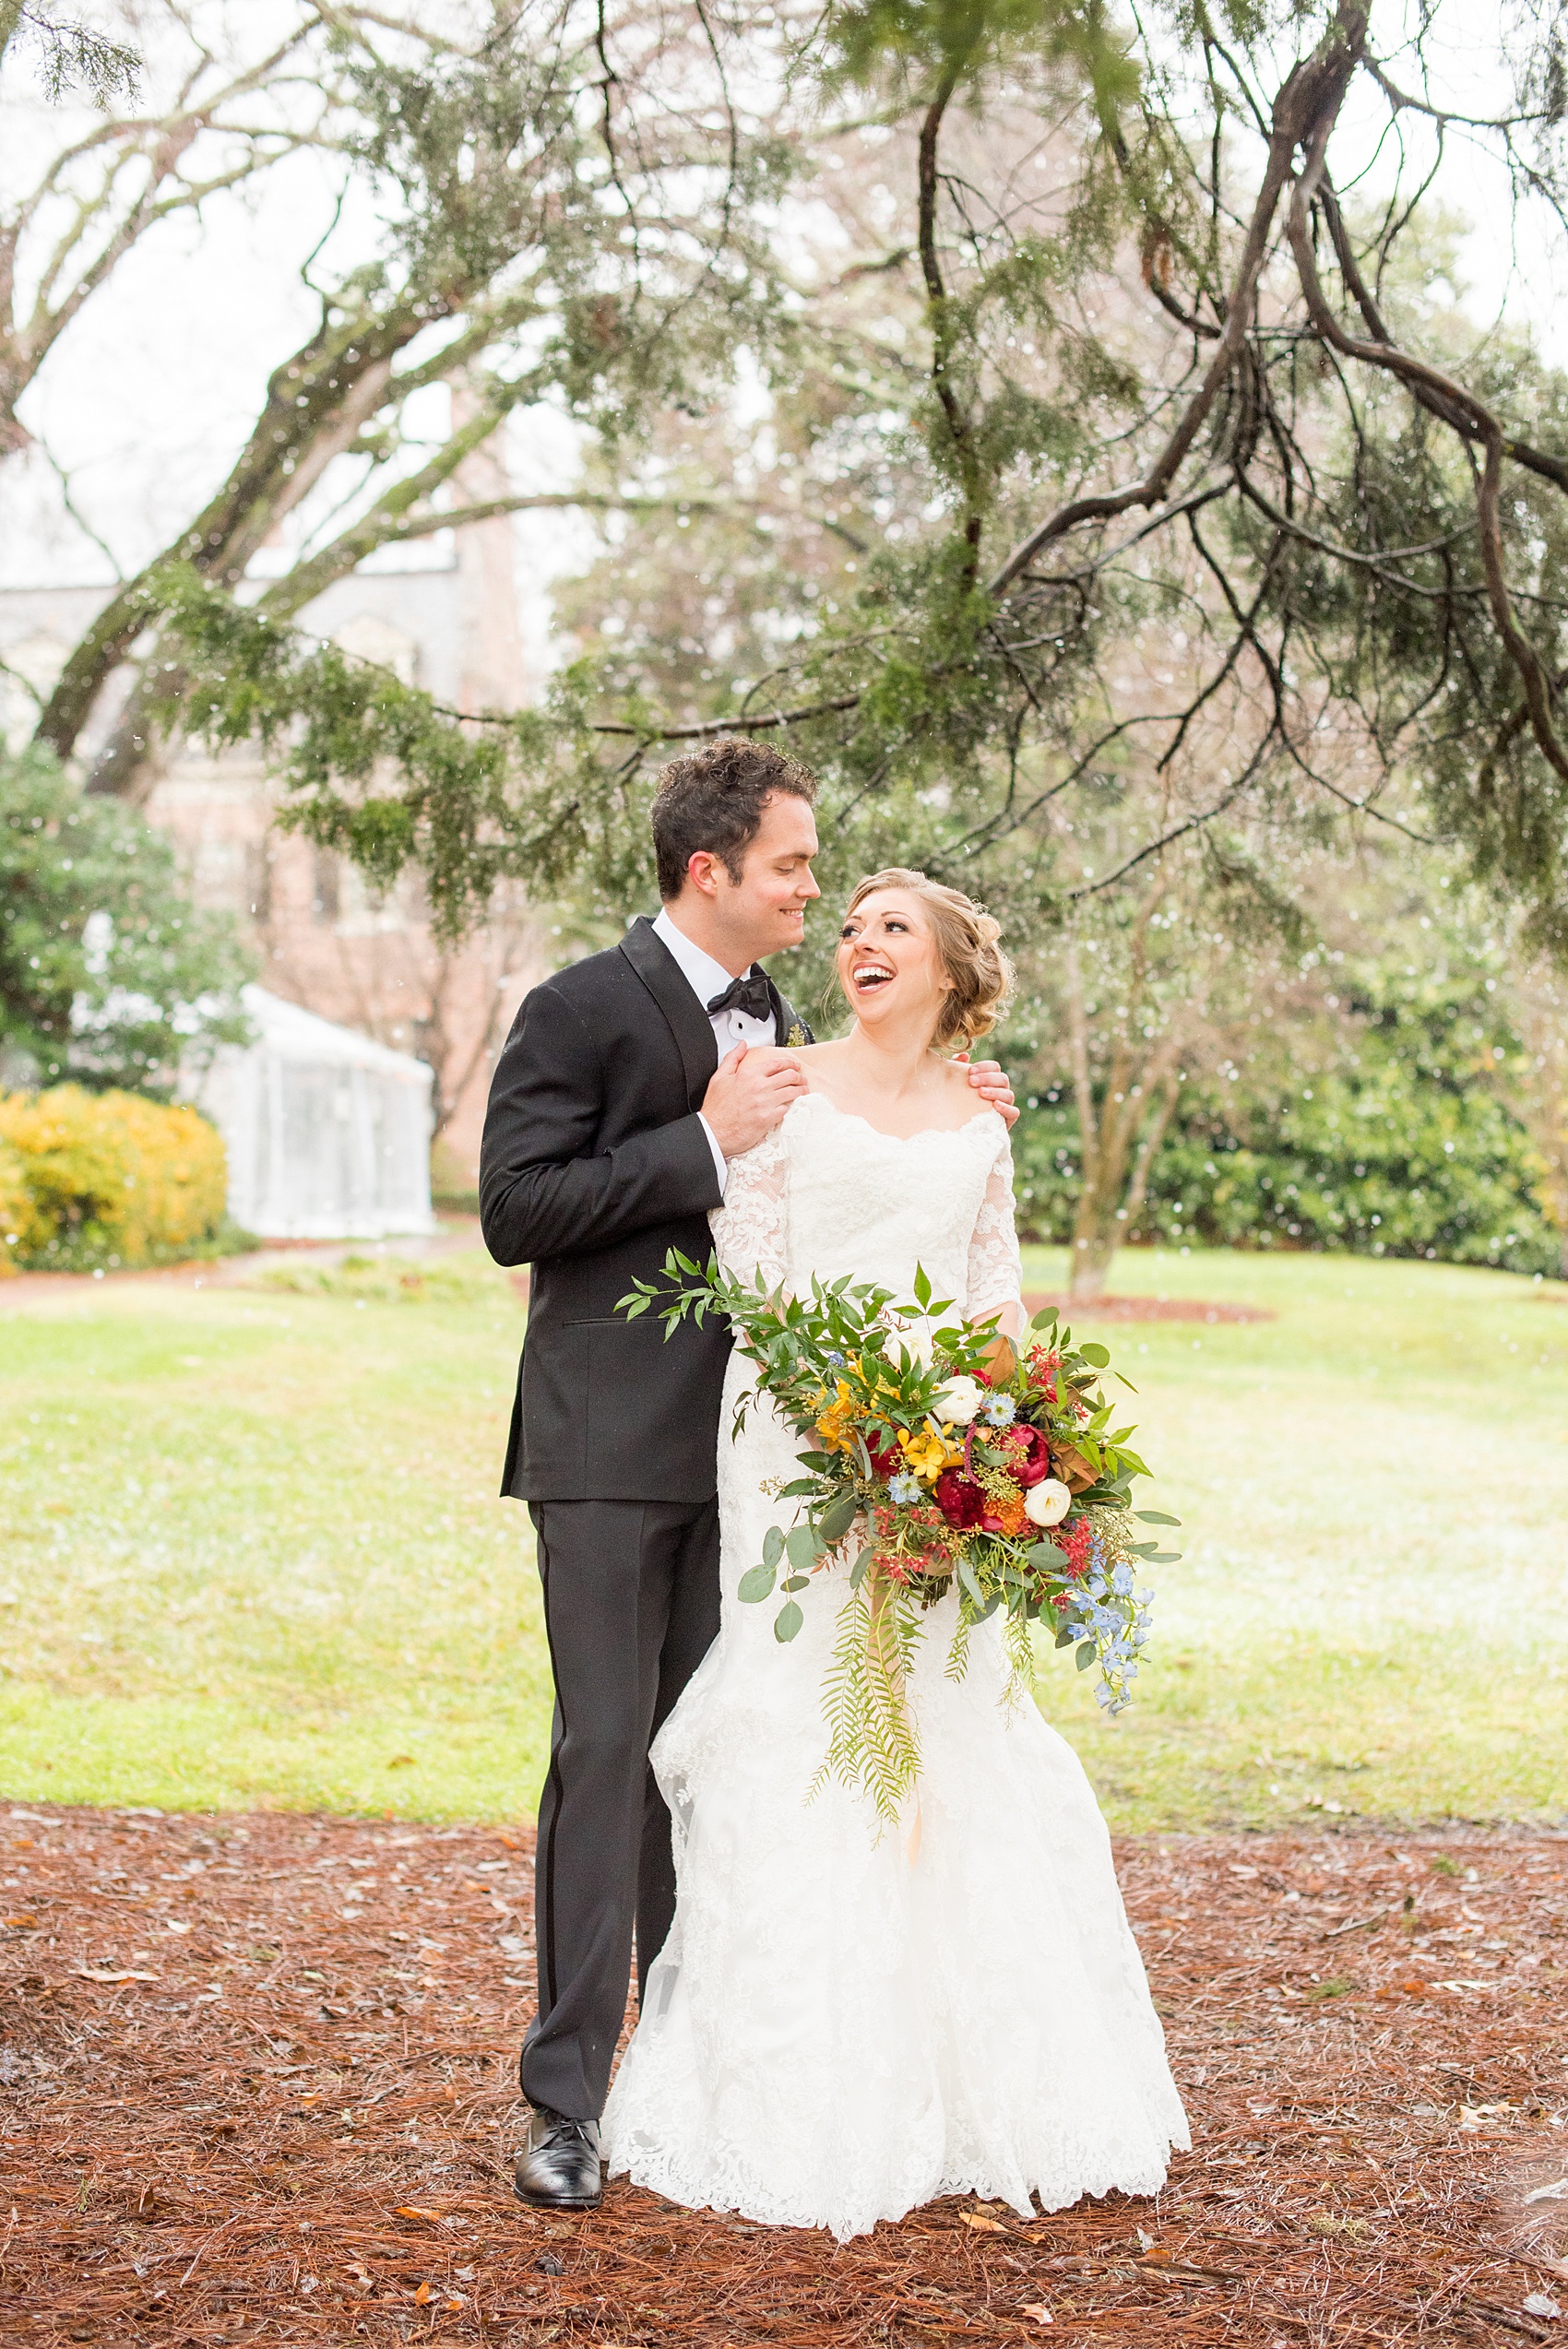 Beautiful wedding photos at The Carolina Inn at Chapel Hill, North Carolina by Mikkel Paige Photography. Photo of the bride and groom laughing through the falling snow. Click through to see the rest of this gorgeous winter wedding! #thecarolinainn #snowywedding